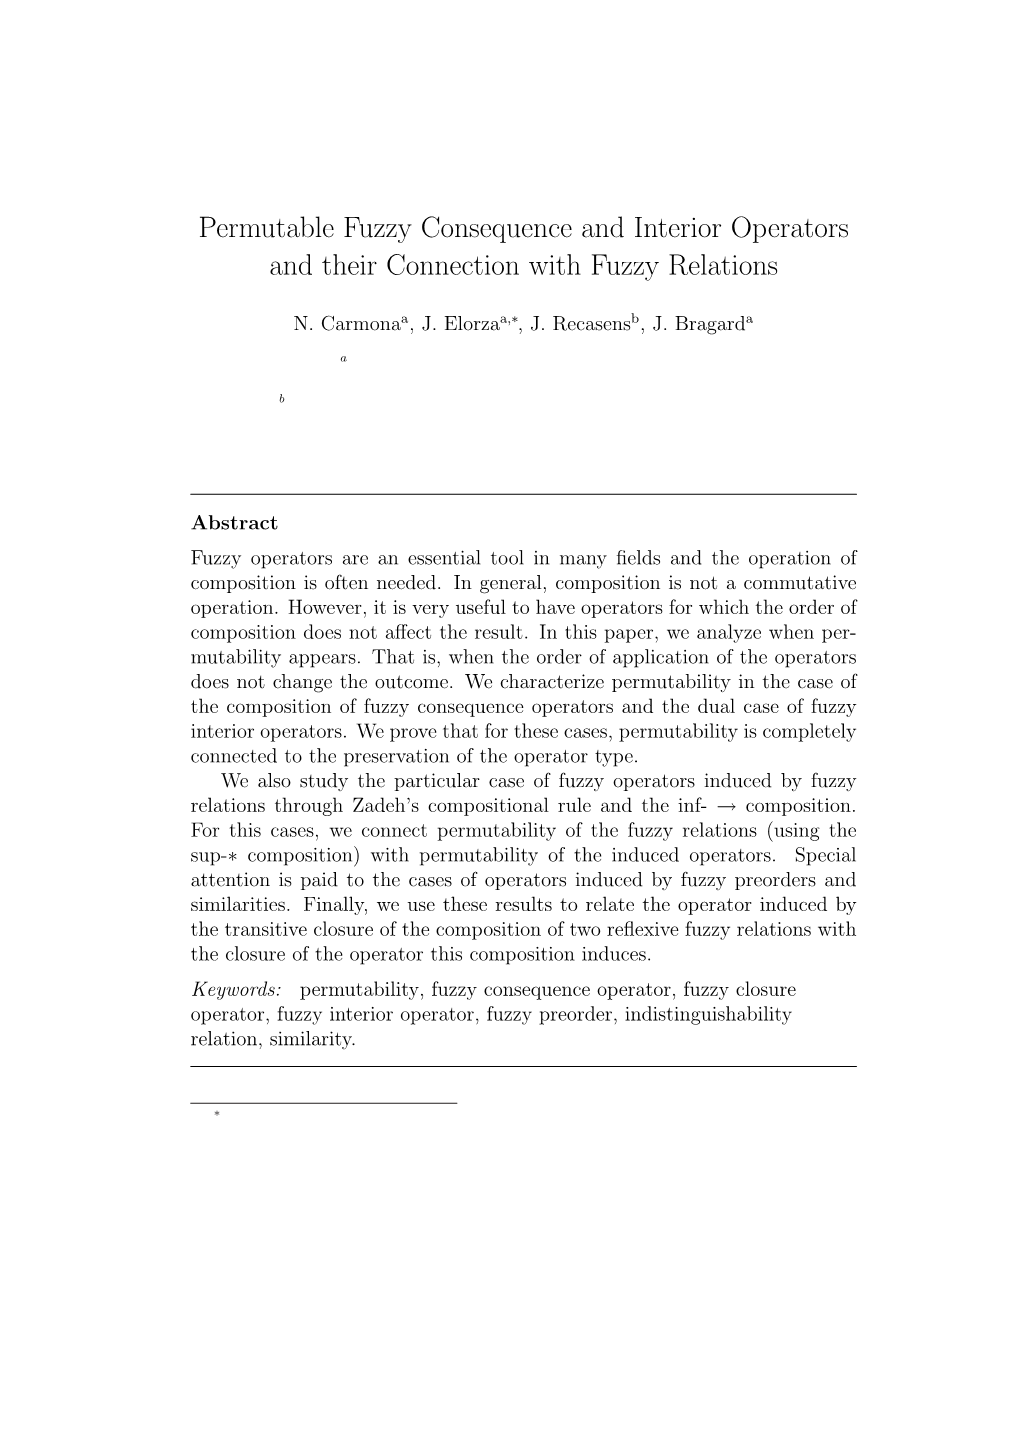 Permutable Fuzzy Consequence and Interior Operators and Their Connection with Fuzzy Relations